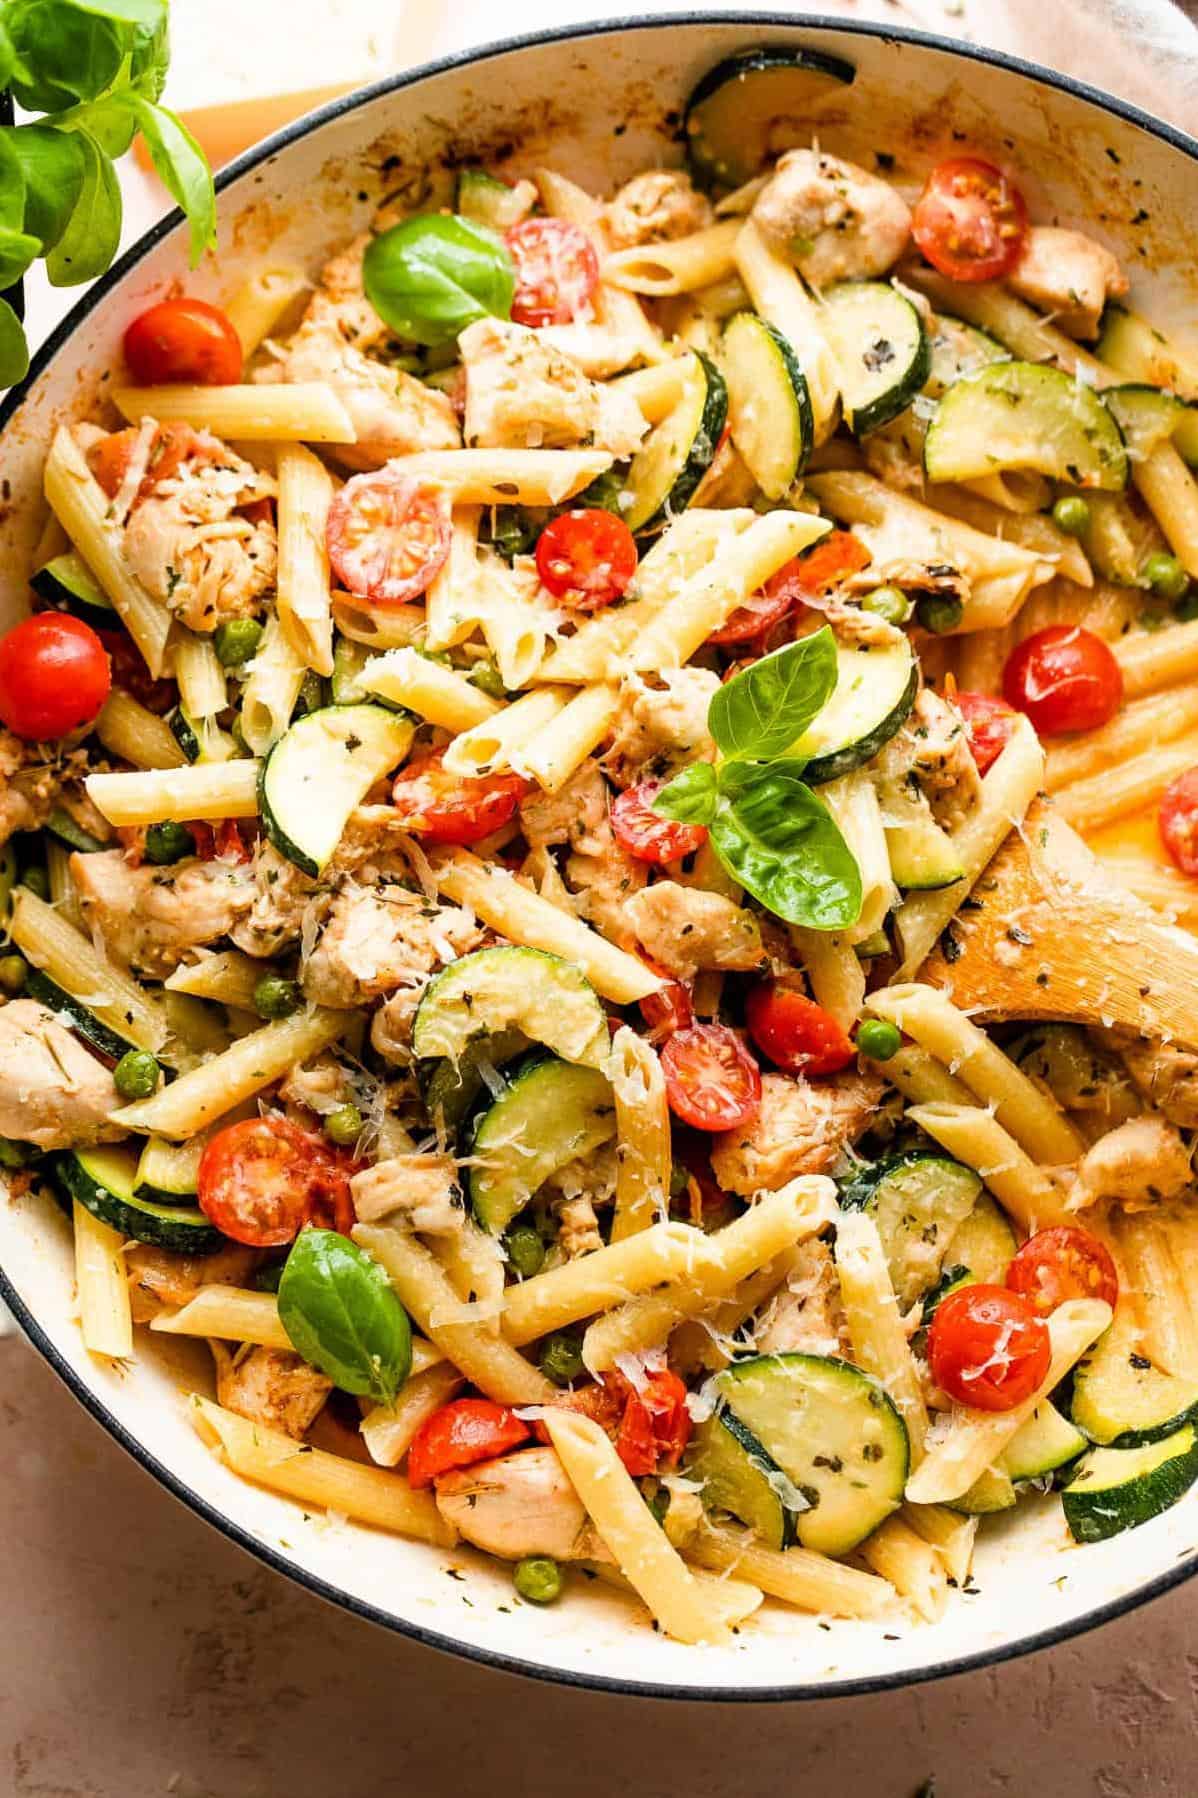  Get ready to taste the rainbow with this colorful pasta dish!